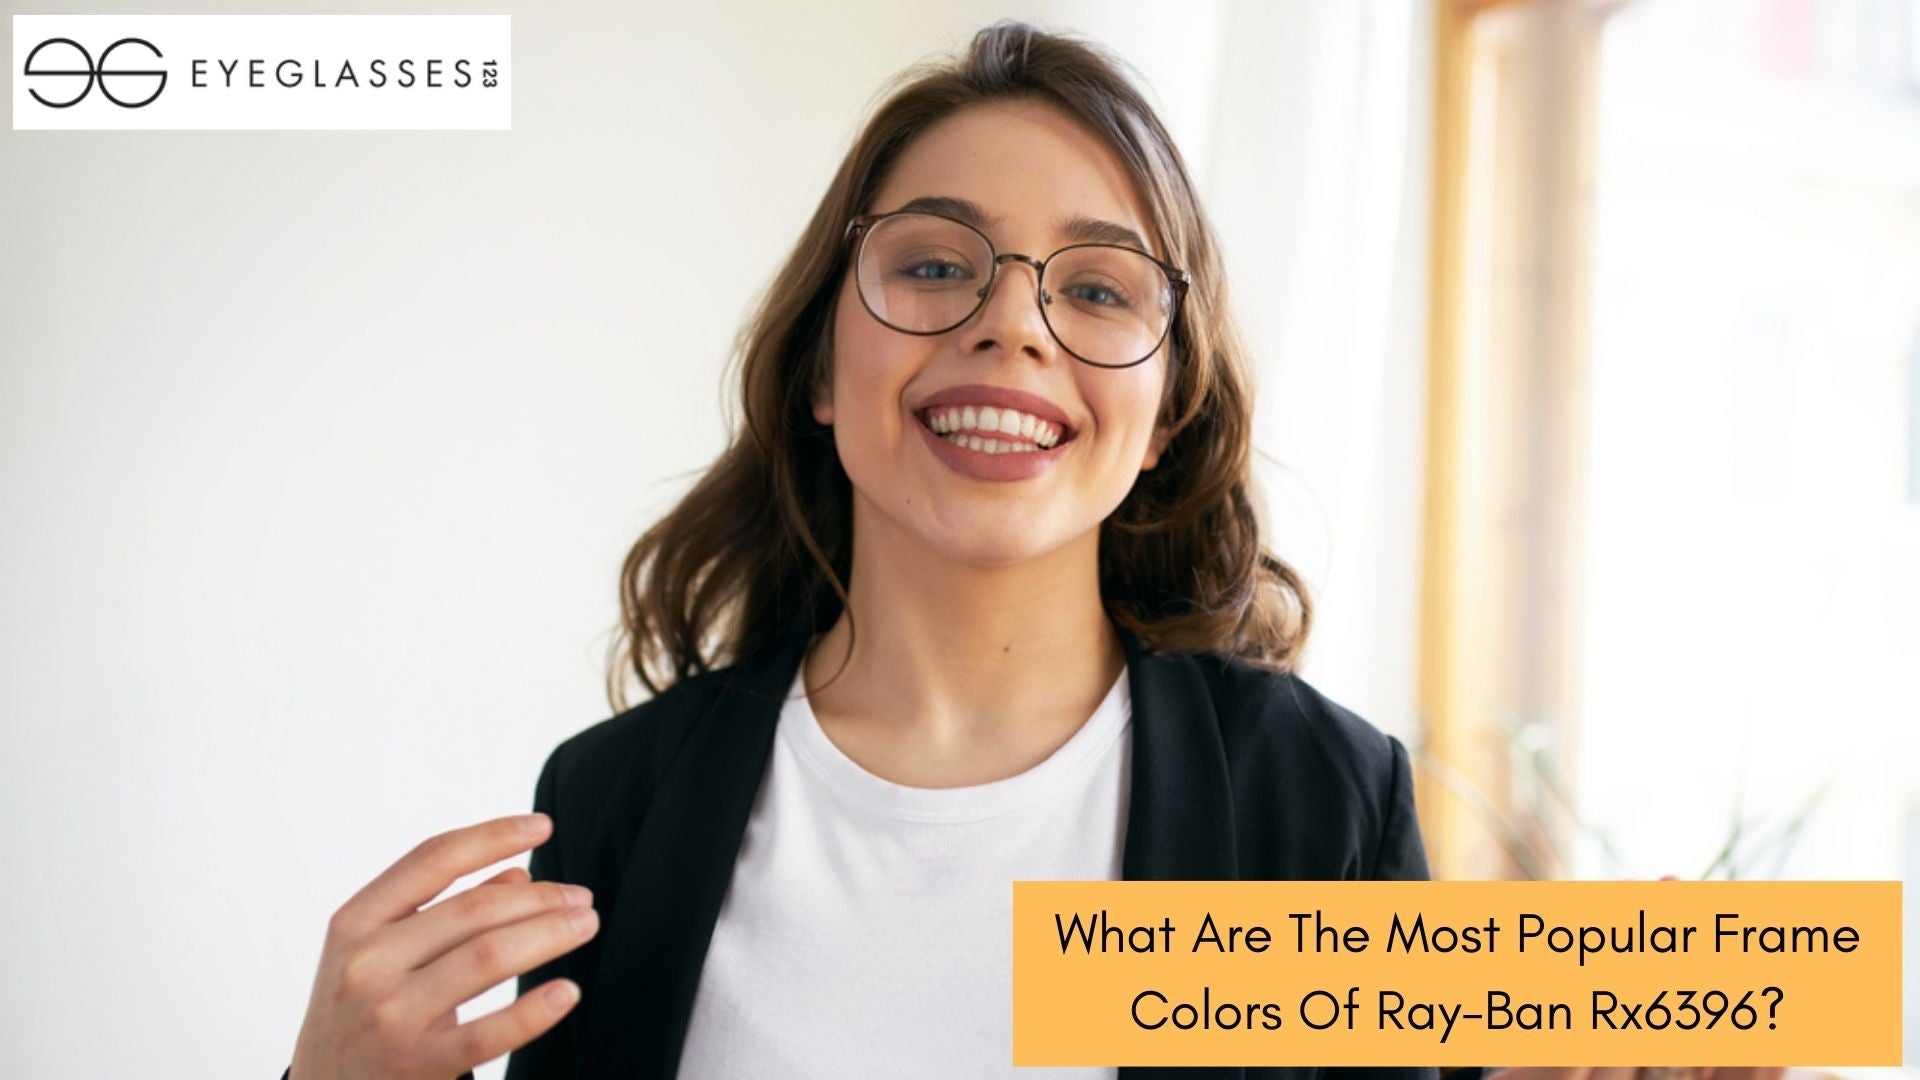 What Are The Most Popular Frame Colors Of Ray-Ban Rx6396?